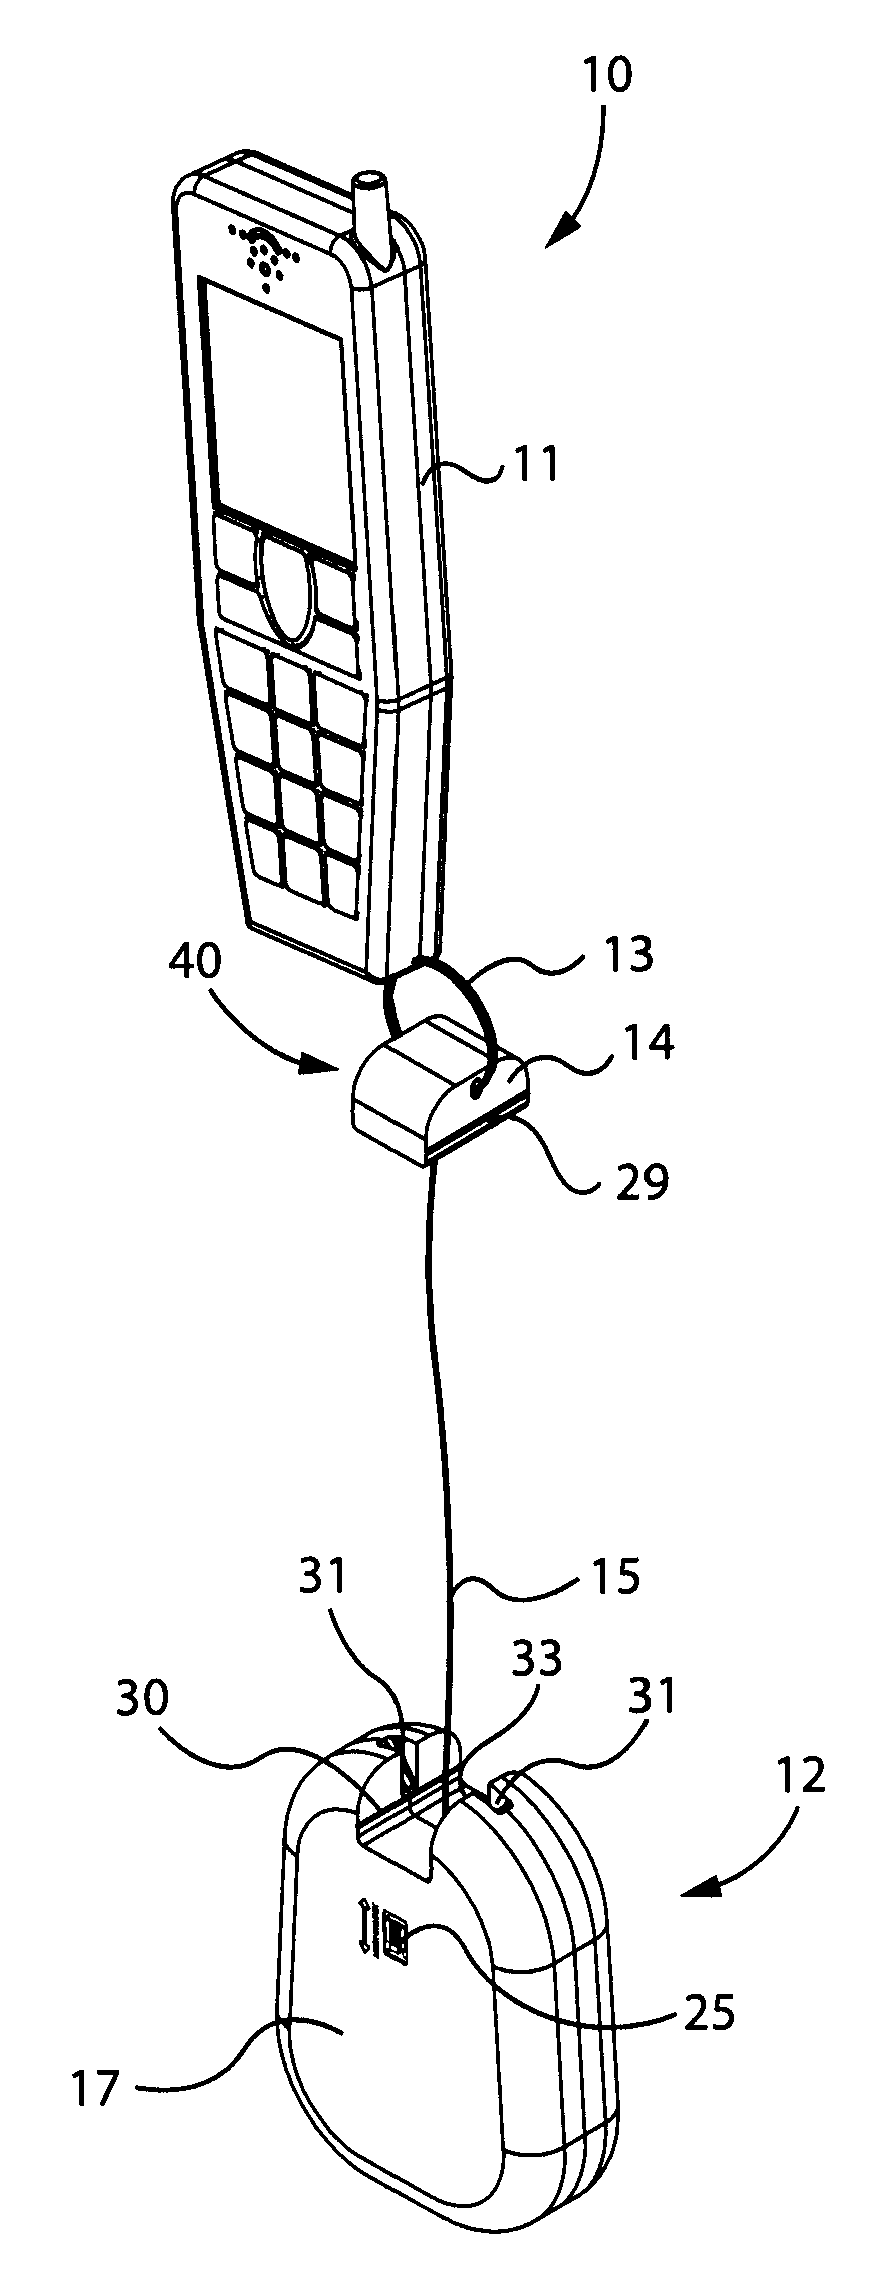 Retractable tether apparatus for use with cellular telephones and associated method